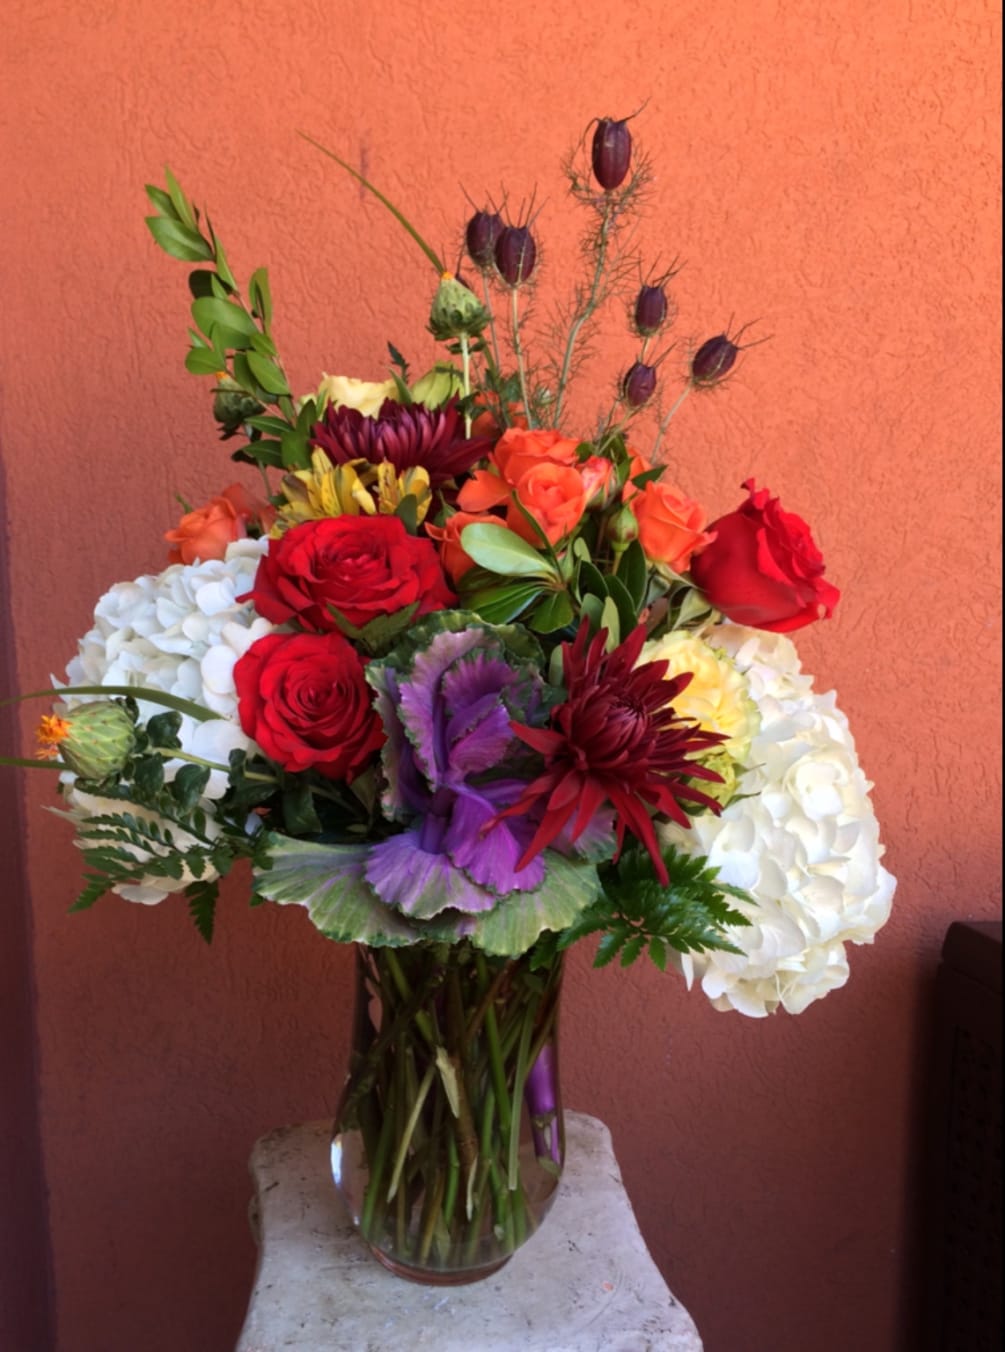 Brighten her day with this bright and happy floral arrangement 